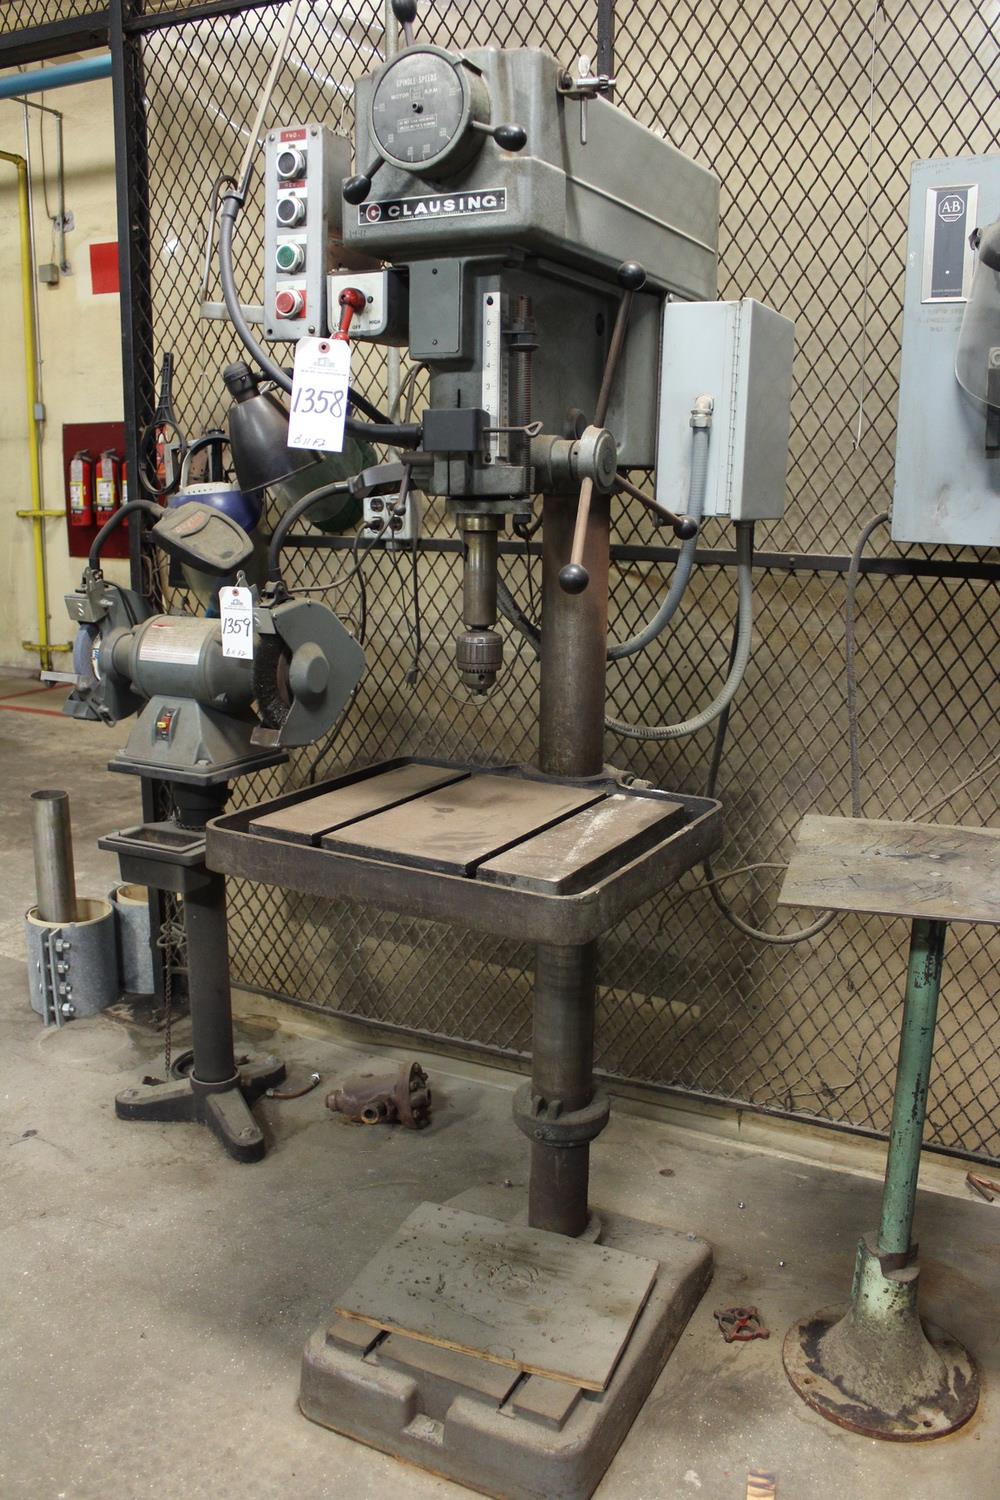 Clausing Drill Press, M# 2277